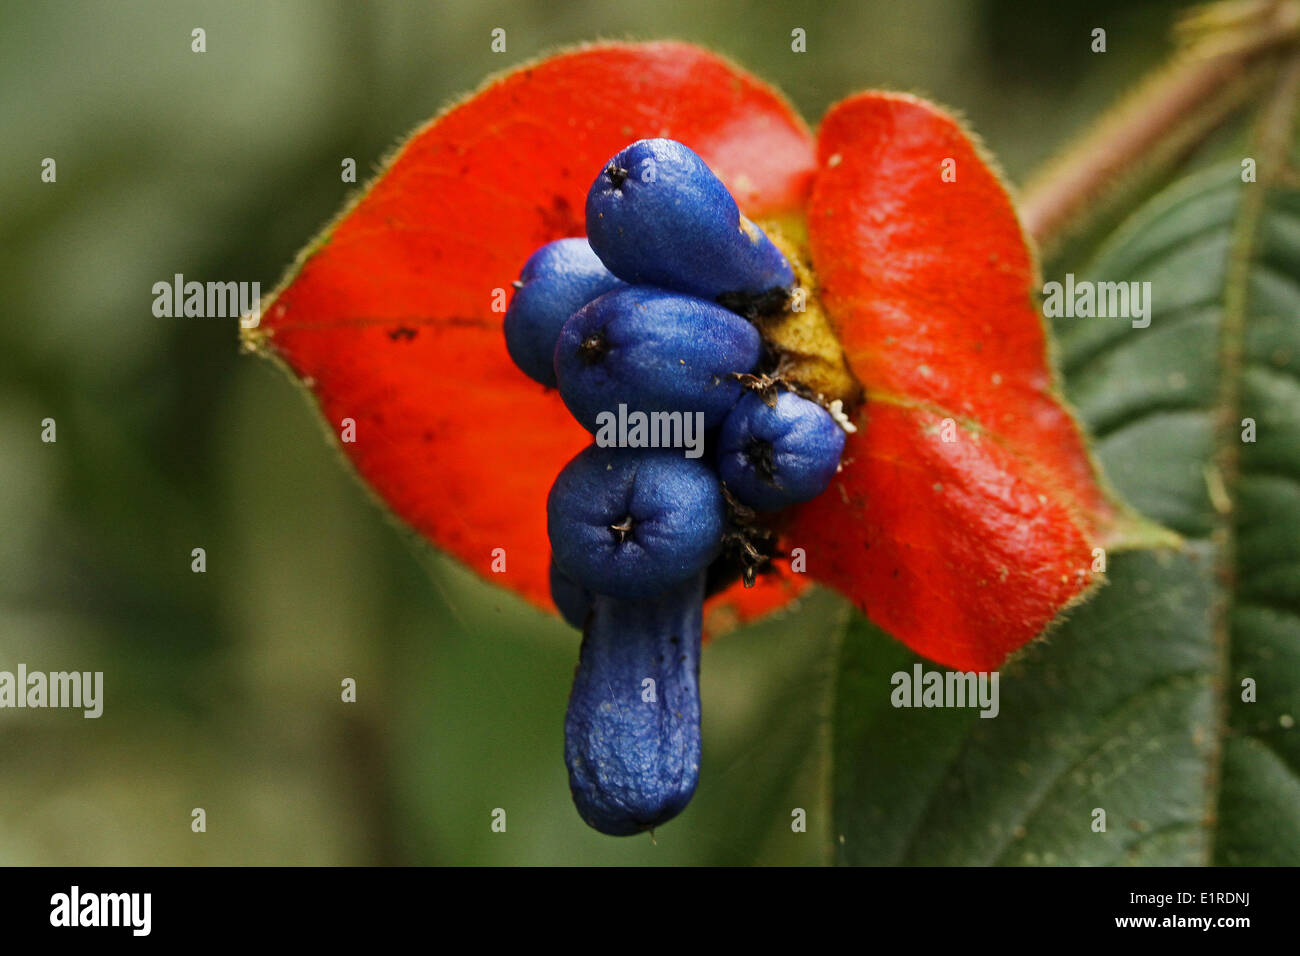 inflorescence with blue berries and red bracts Stock Photo